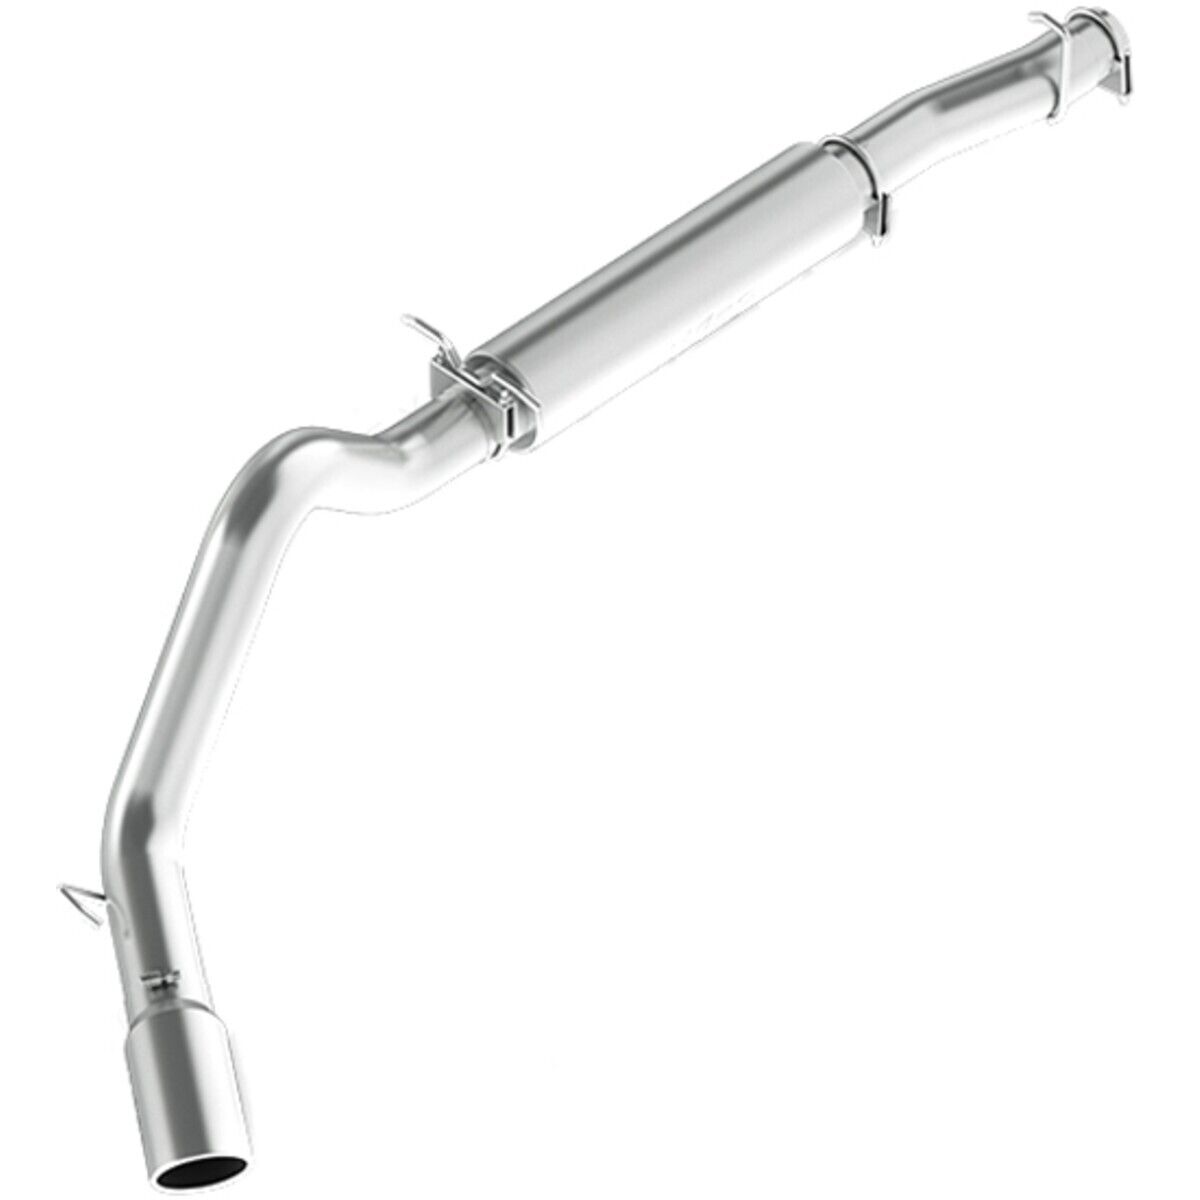 S6285AL MBRP Exhaust System for E350 Van Ford E-350 Club Wagon Super Duty 04-07